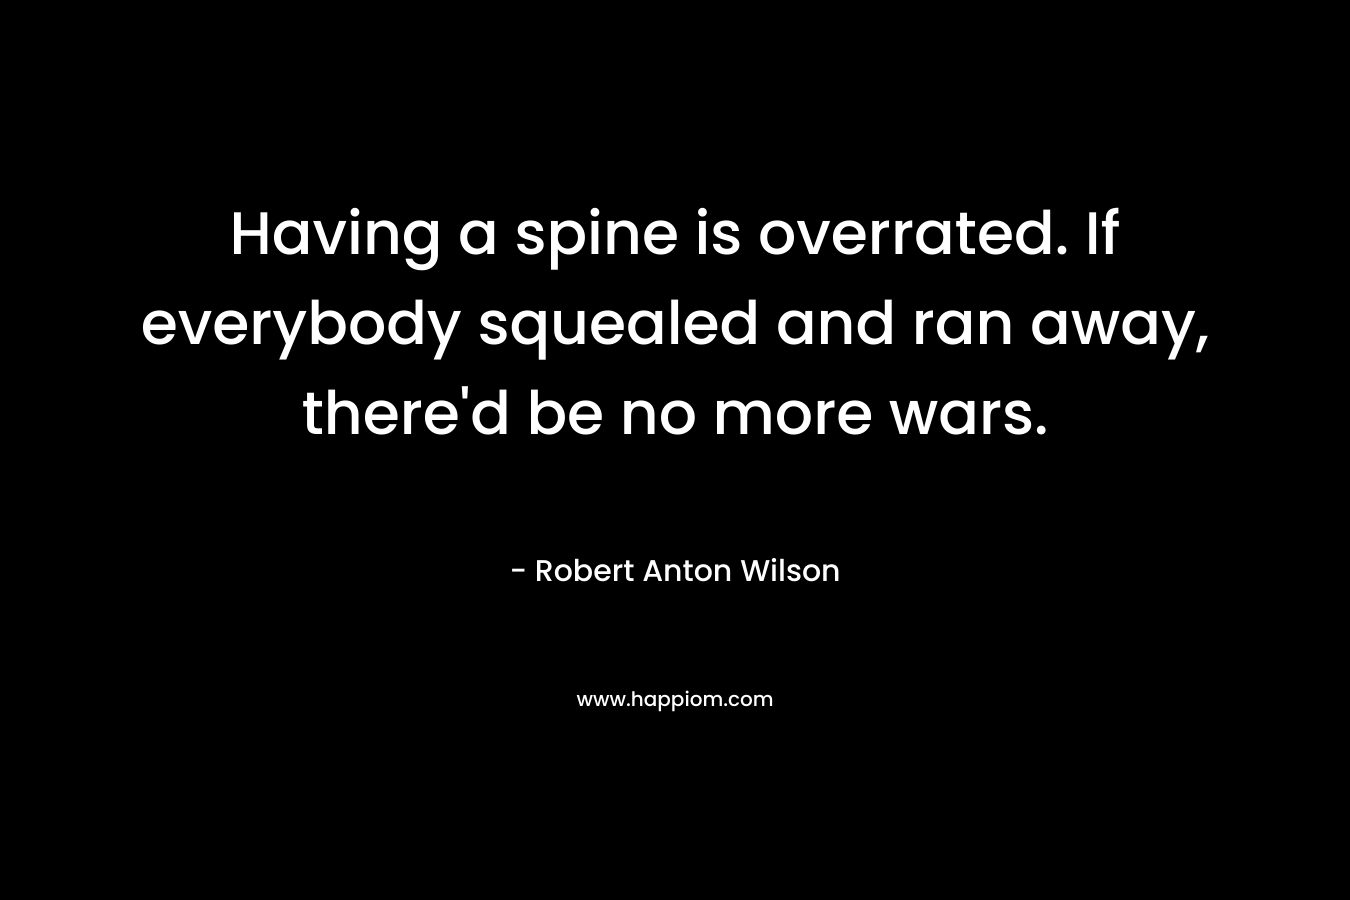 Having a spine is overrated. If everybody squealed and ran away, there’d be no more wars. – Robert Anton Wilson